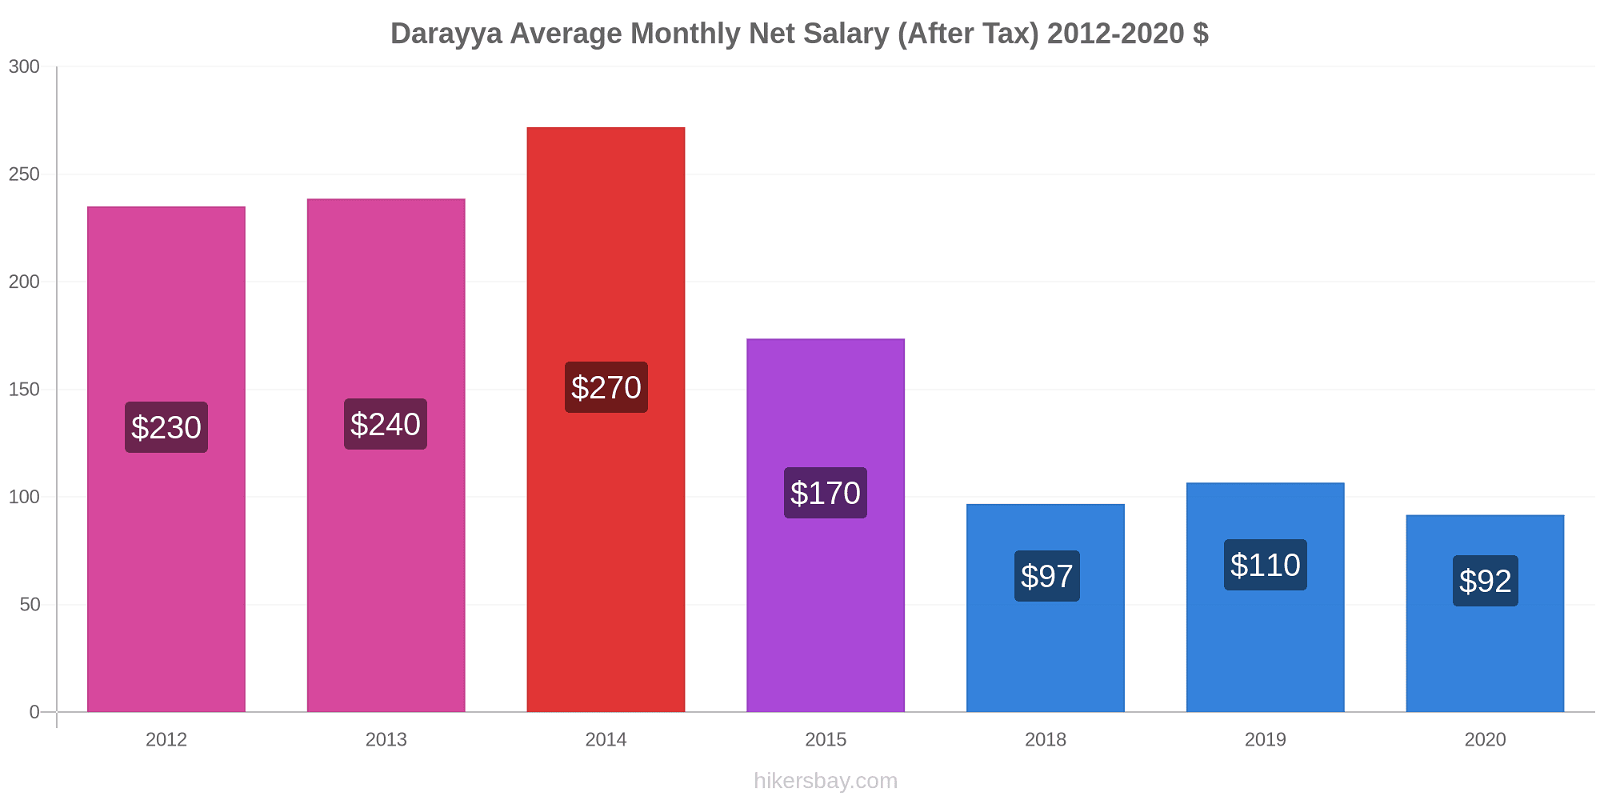 Darayya price changes Average Monthly Net Salary (After Tax) hikersbay.com